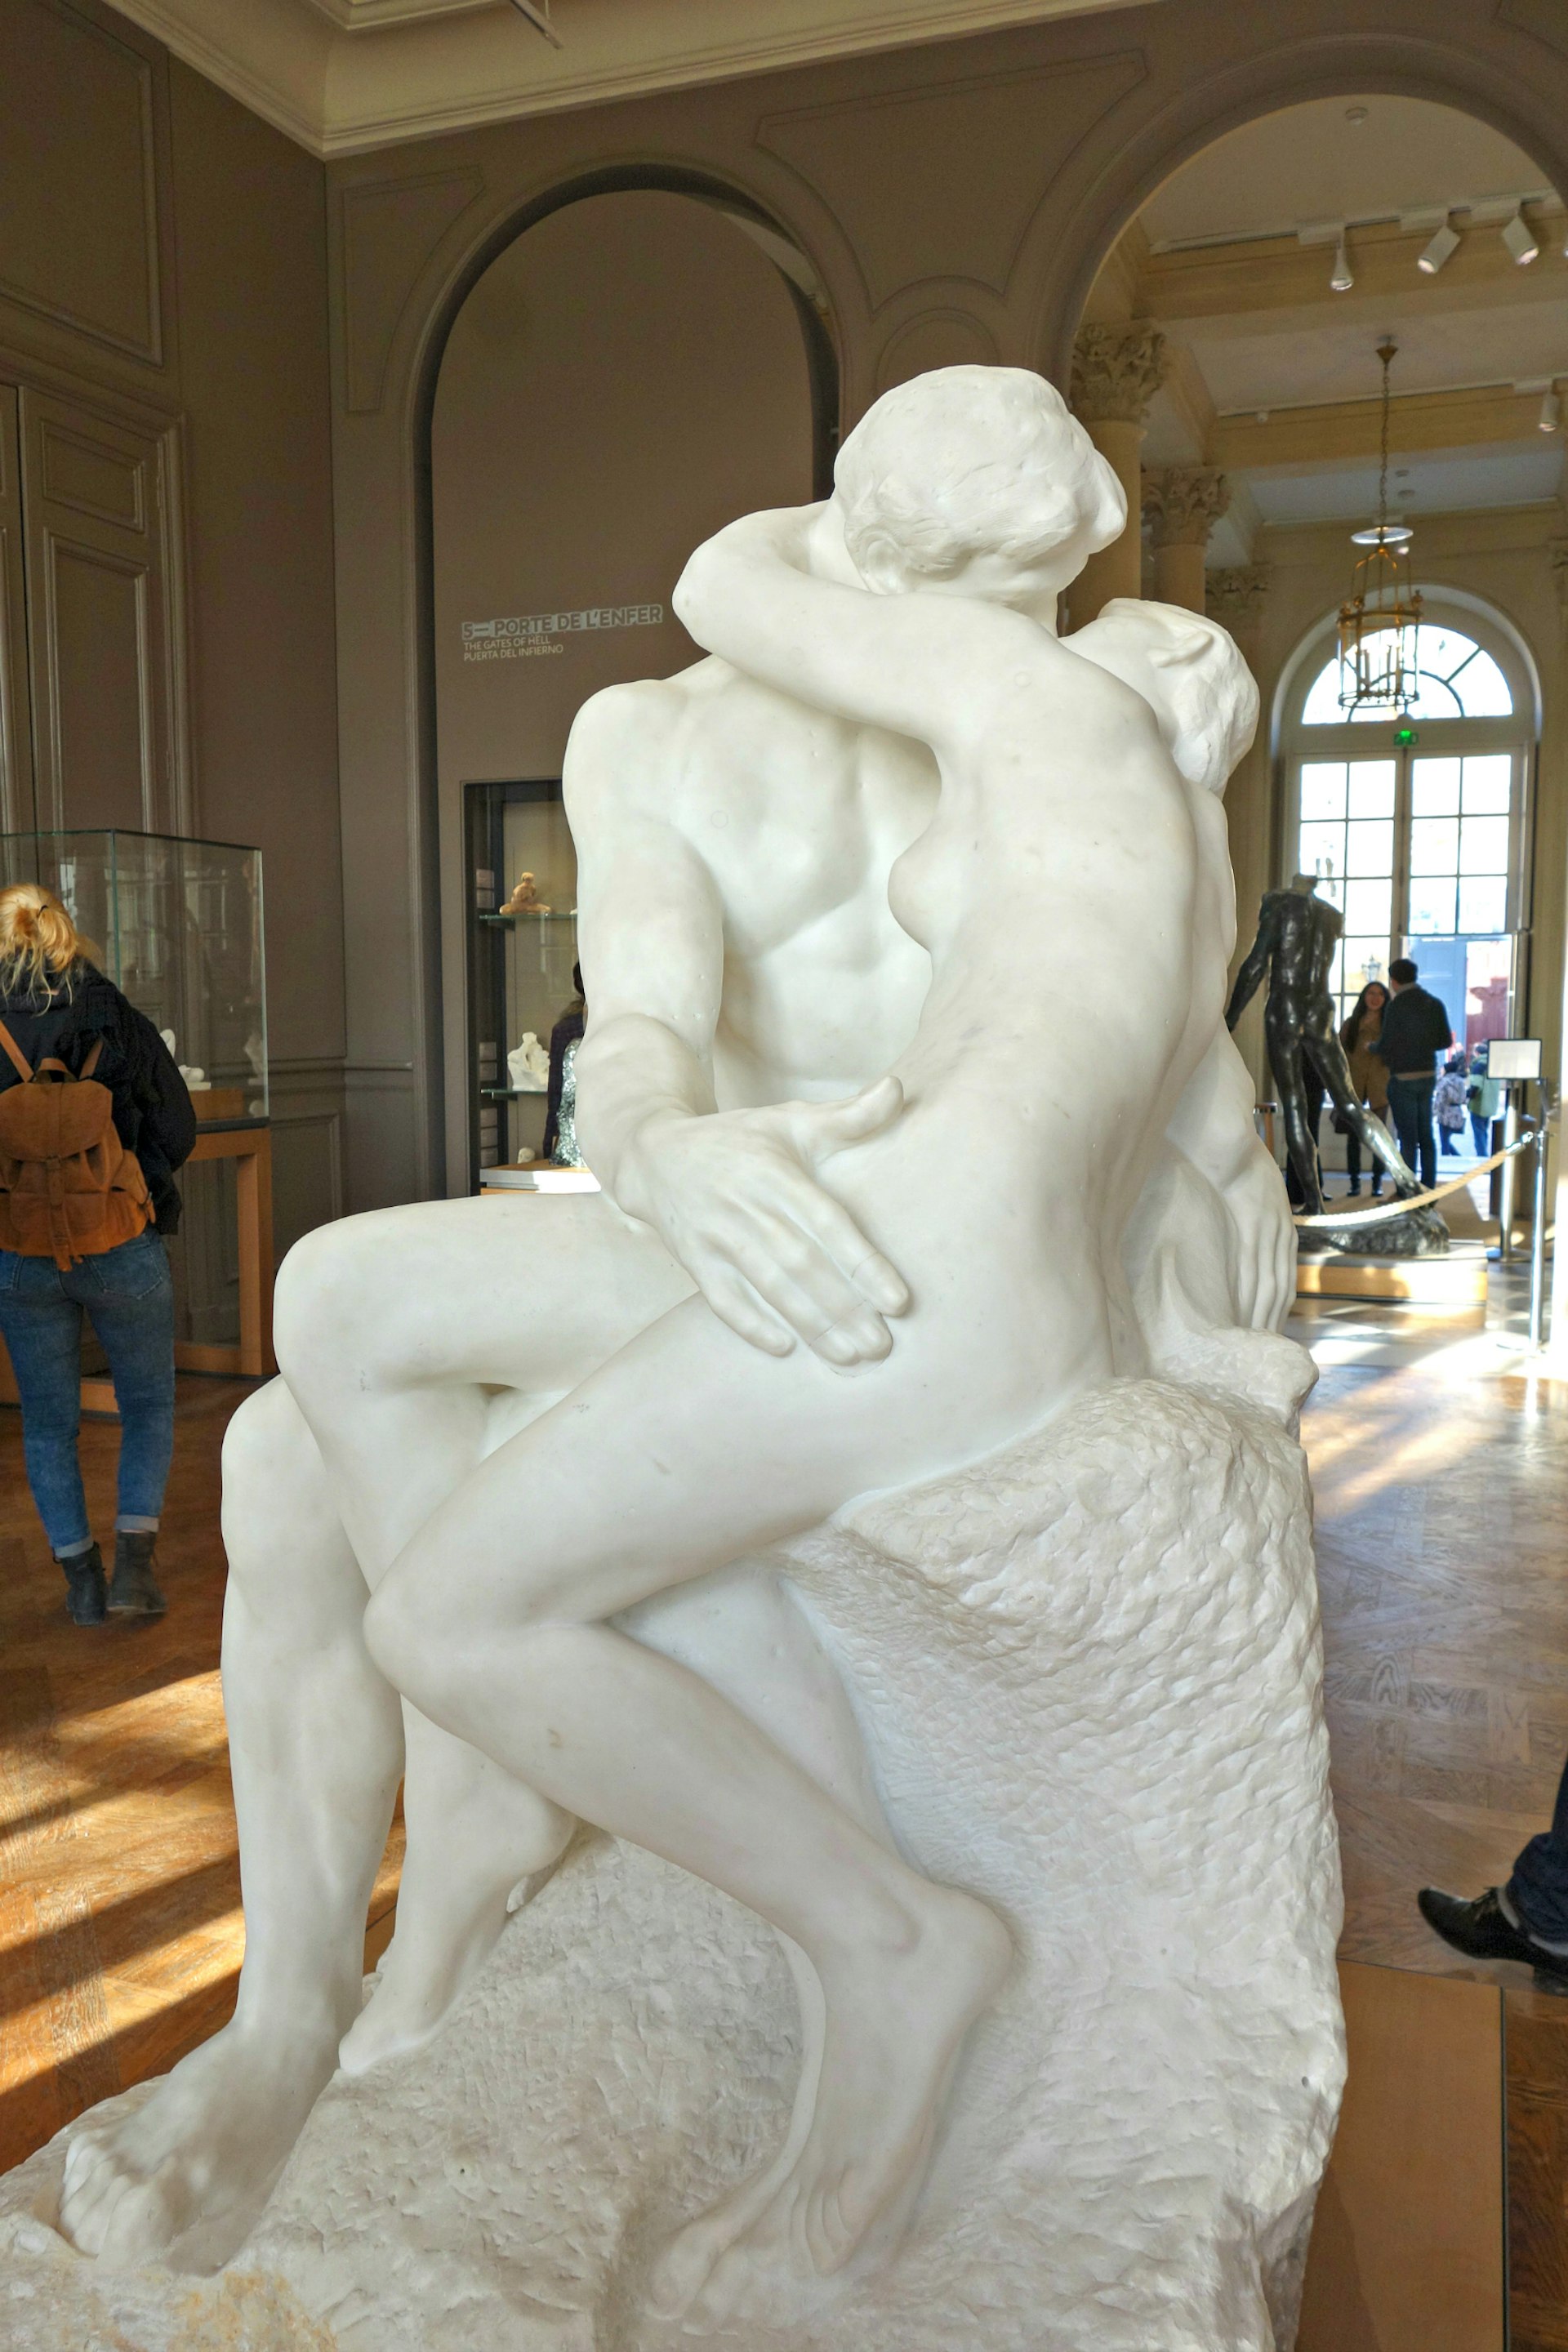 The Kiss sculpture by Rodin in the Rodin Museum, Paris. The sculpture portrays two people passionately kissing.